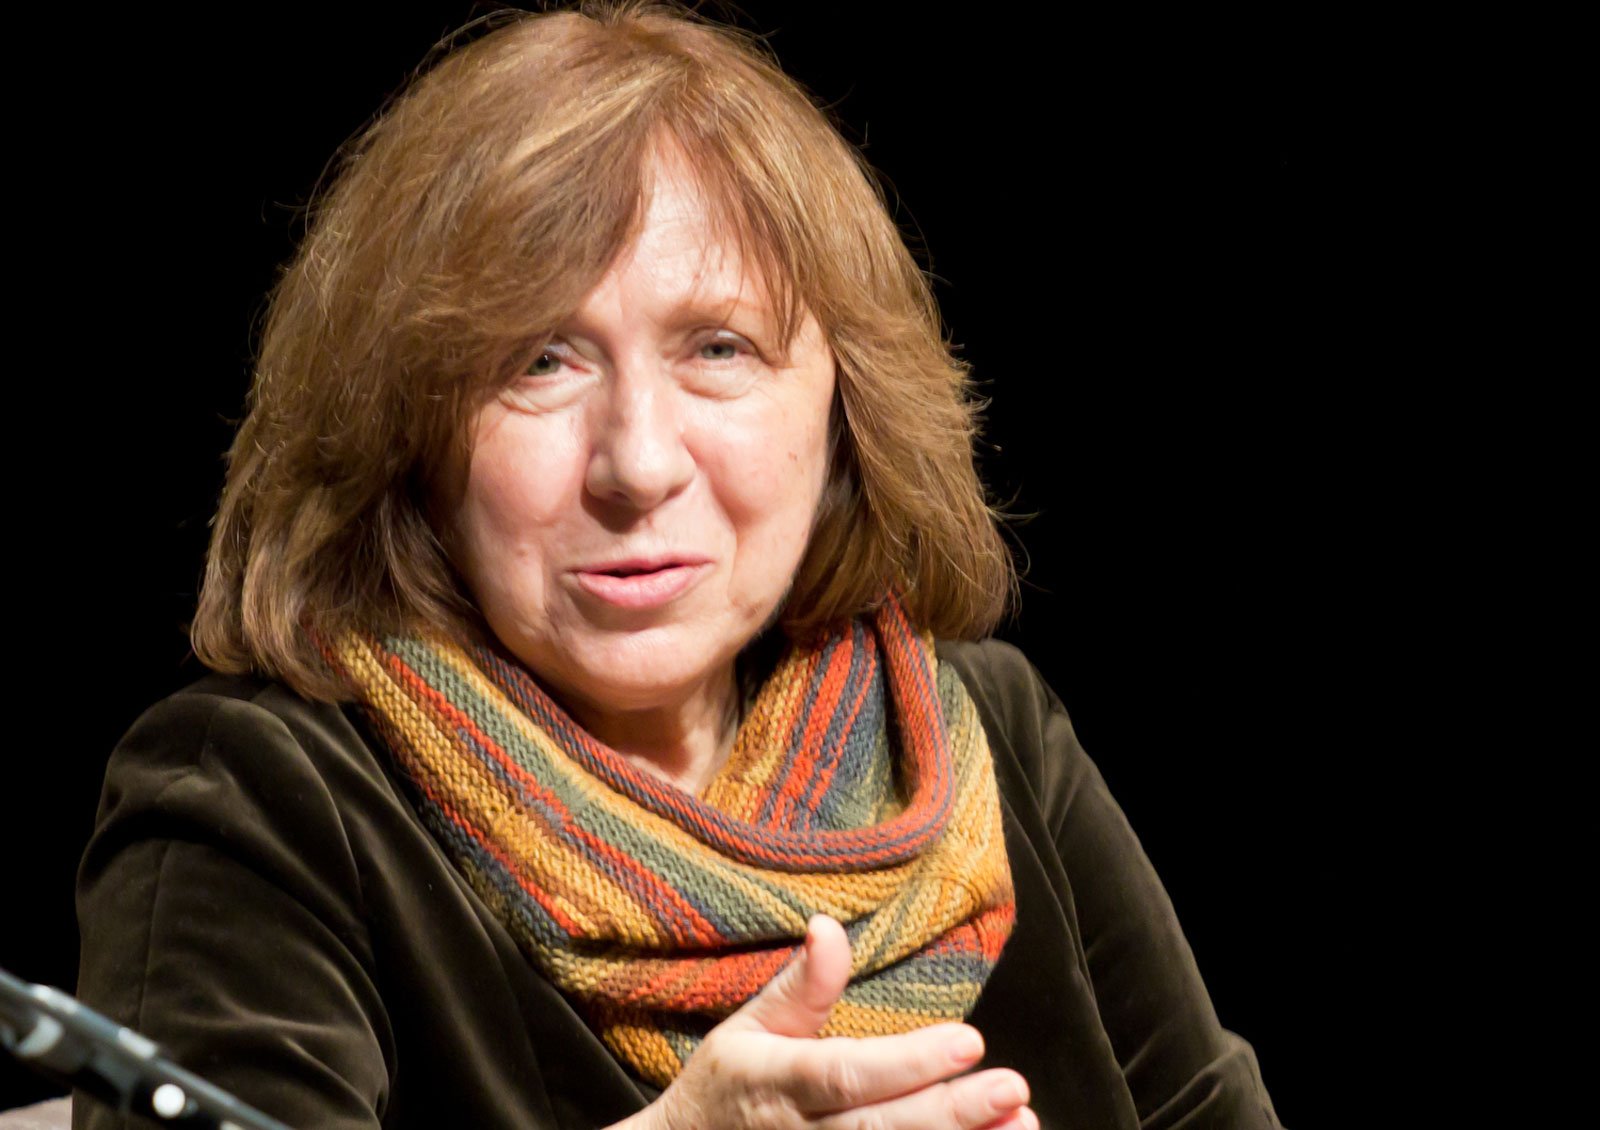 Svetlana Alexievich’s next book is on ‘revolution with a woman’s face’ in Belarus